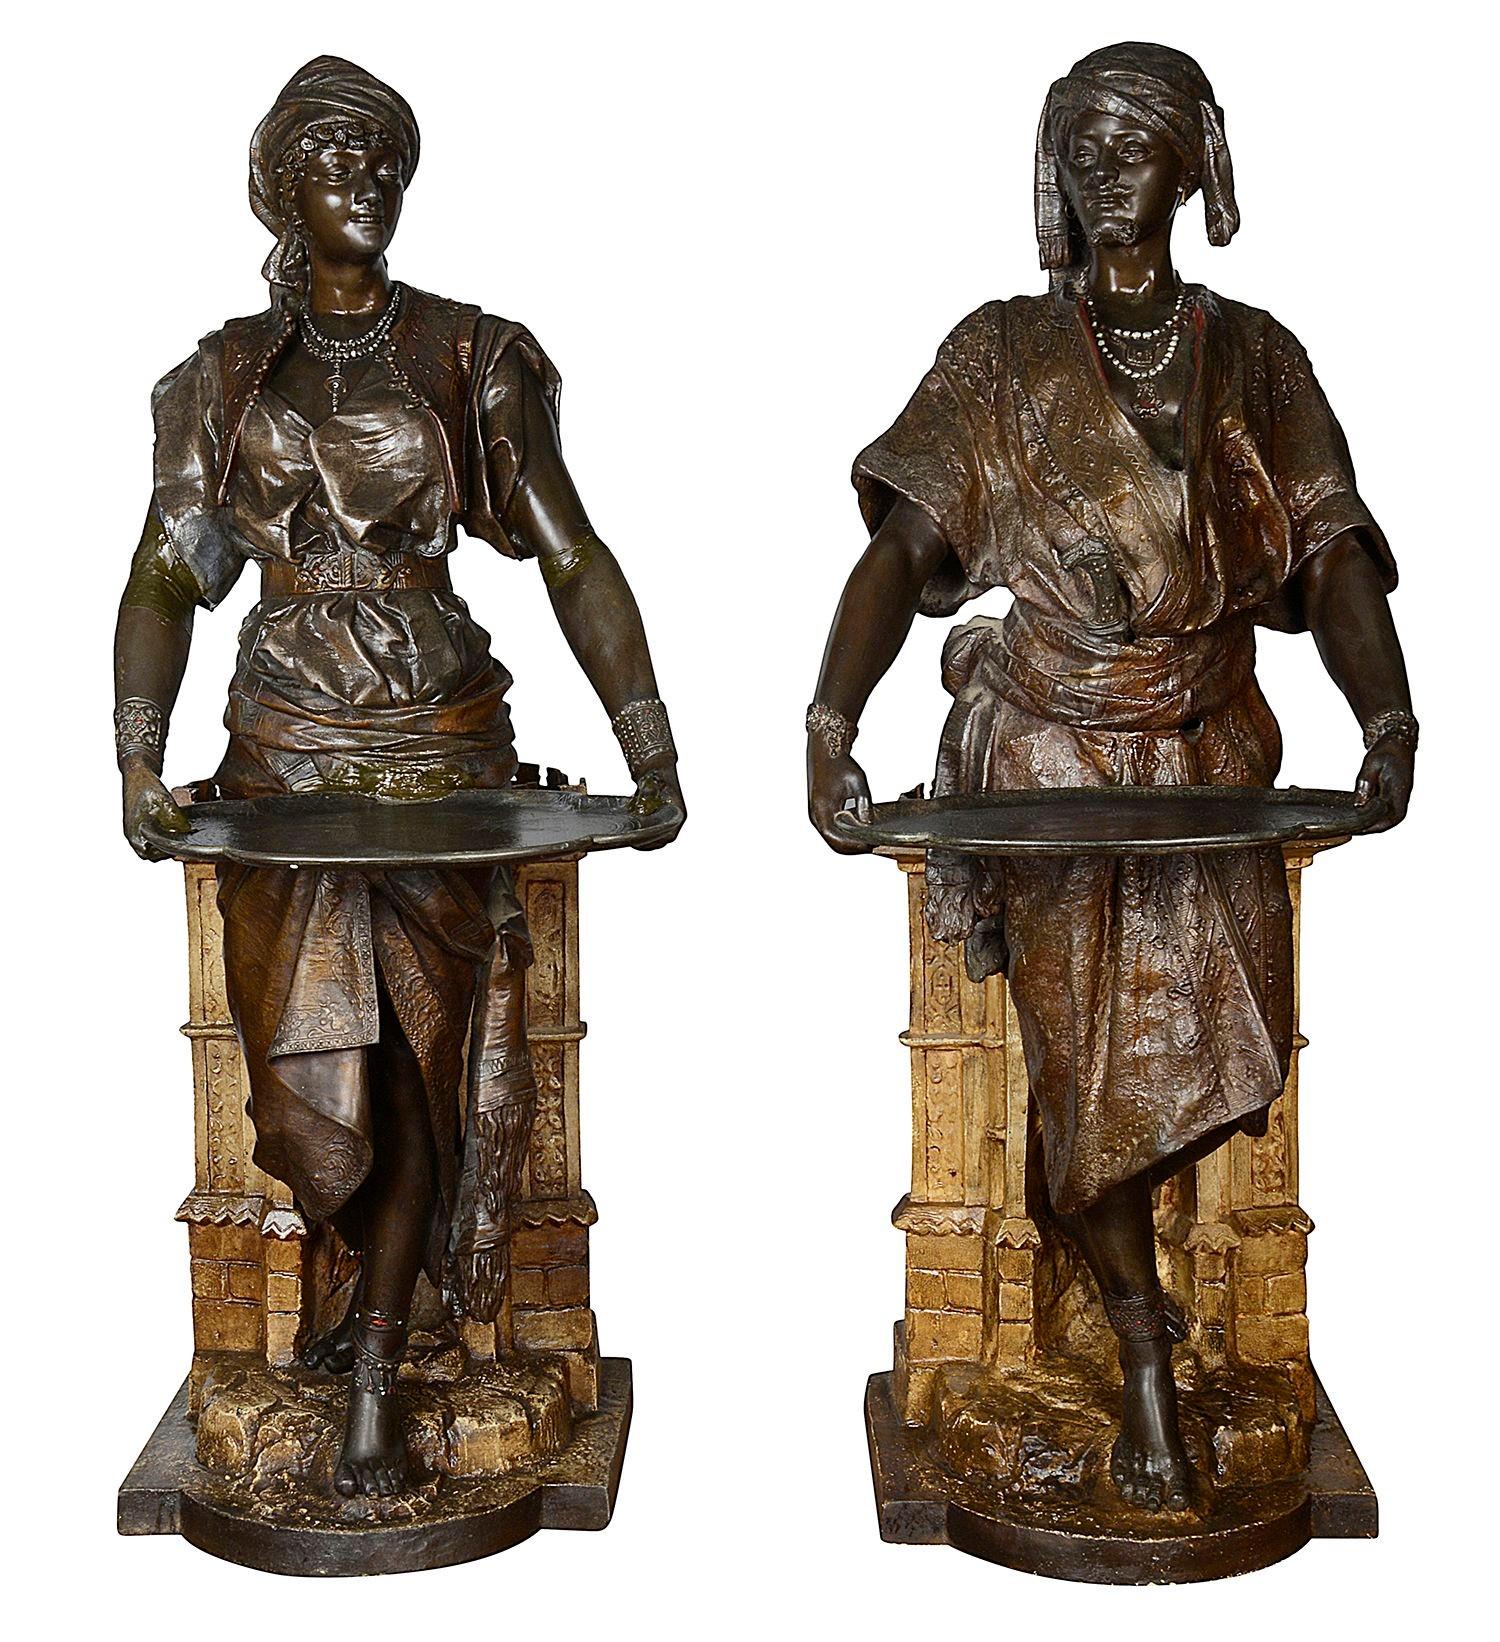 An impressive pair of 19th Century French cold painted bronzed Arab spelter figures, each holding a tray and leaning against castle like pedestals.
Signed at the base

Batch 75